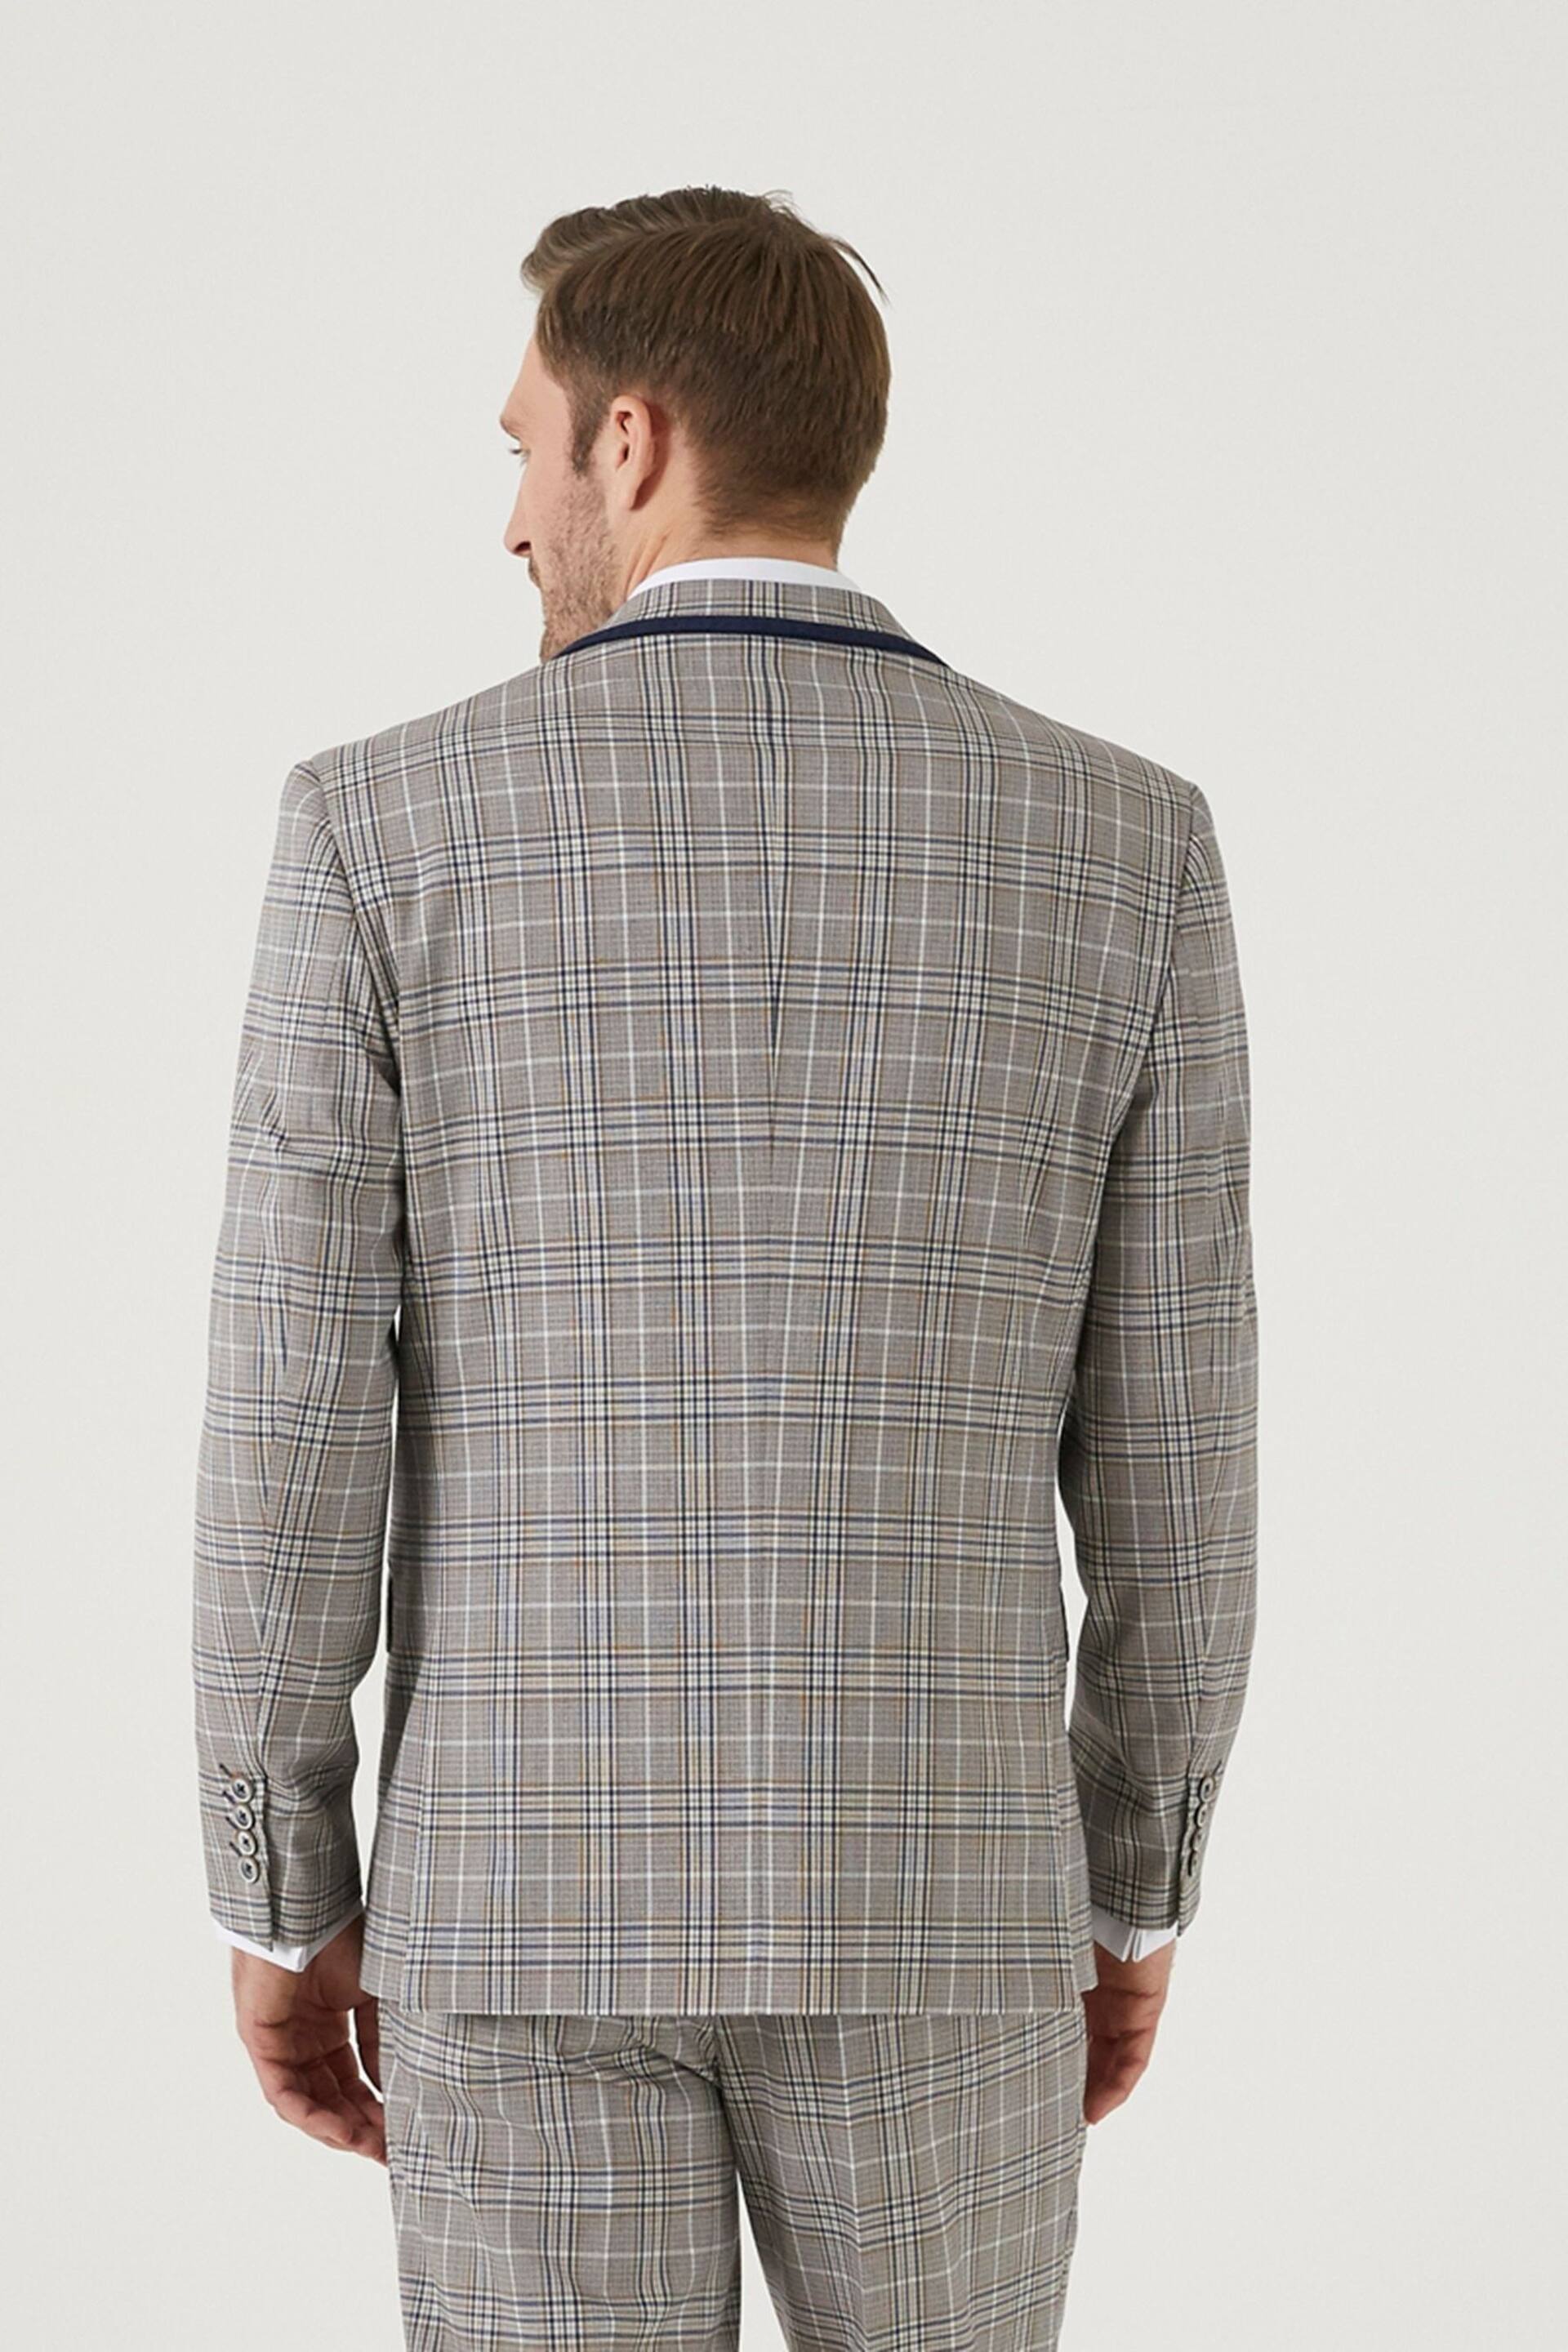 Skopes Tailored Fit Natural Whittington Check Suit: Jacket - Image 3 of 4